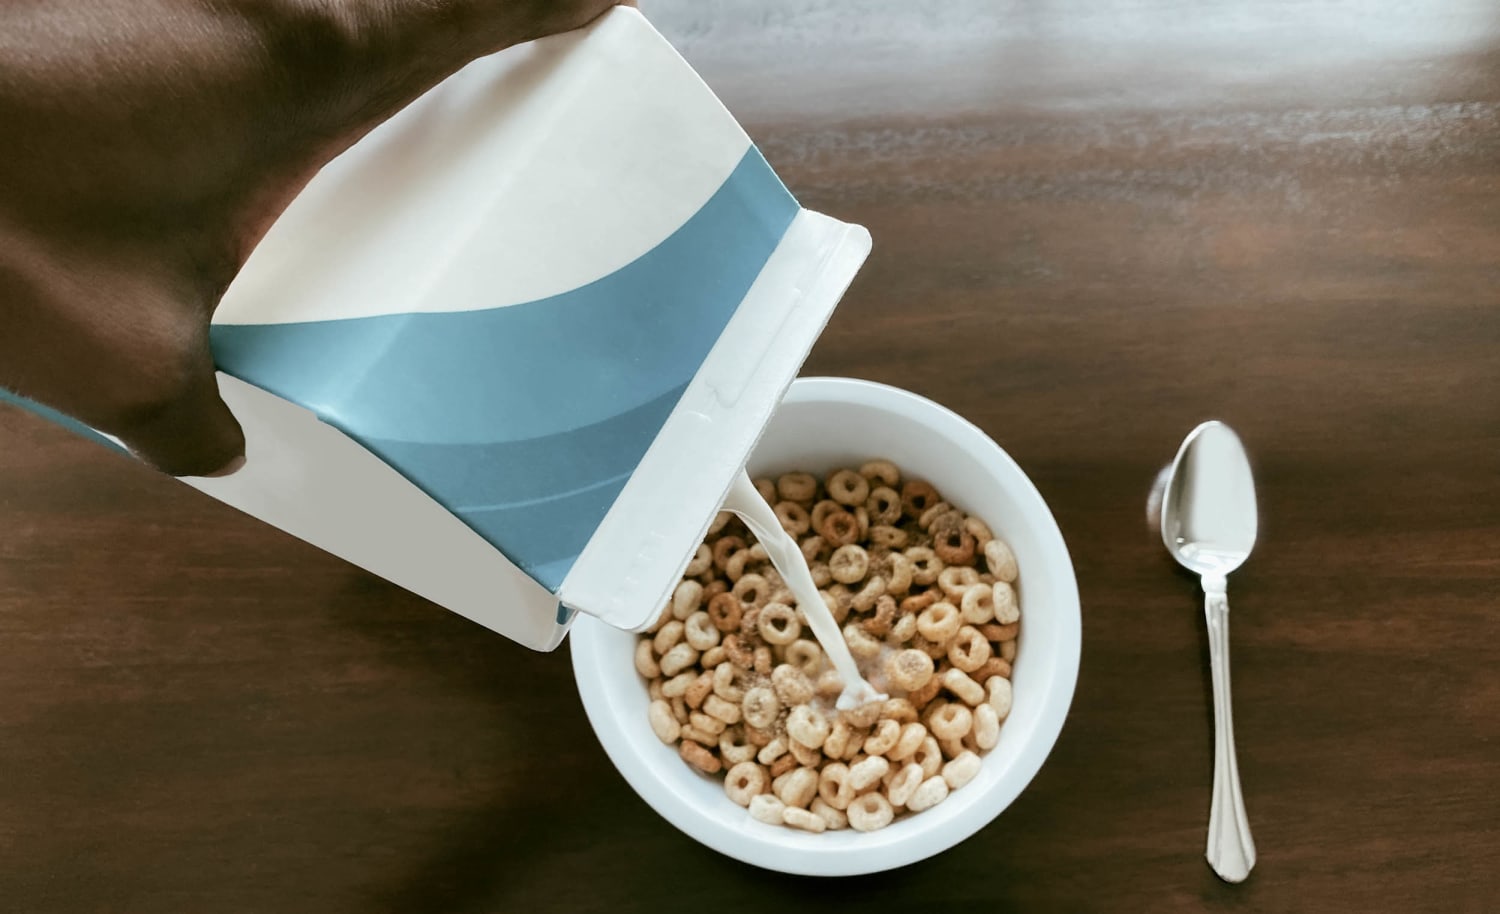 Is cereal for dinner a healthy meal? Dietitian explains amid Kellogg CEO controversy